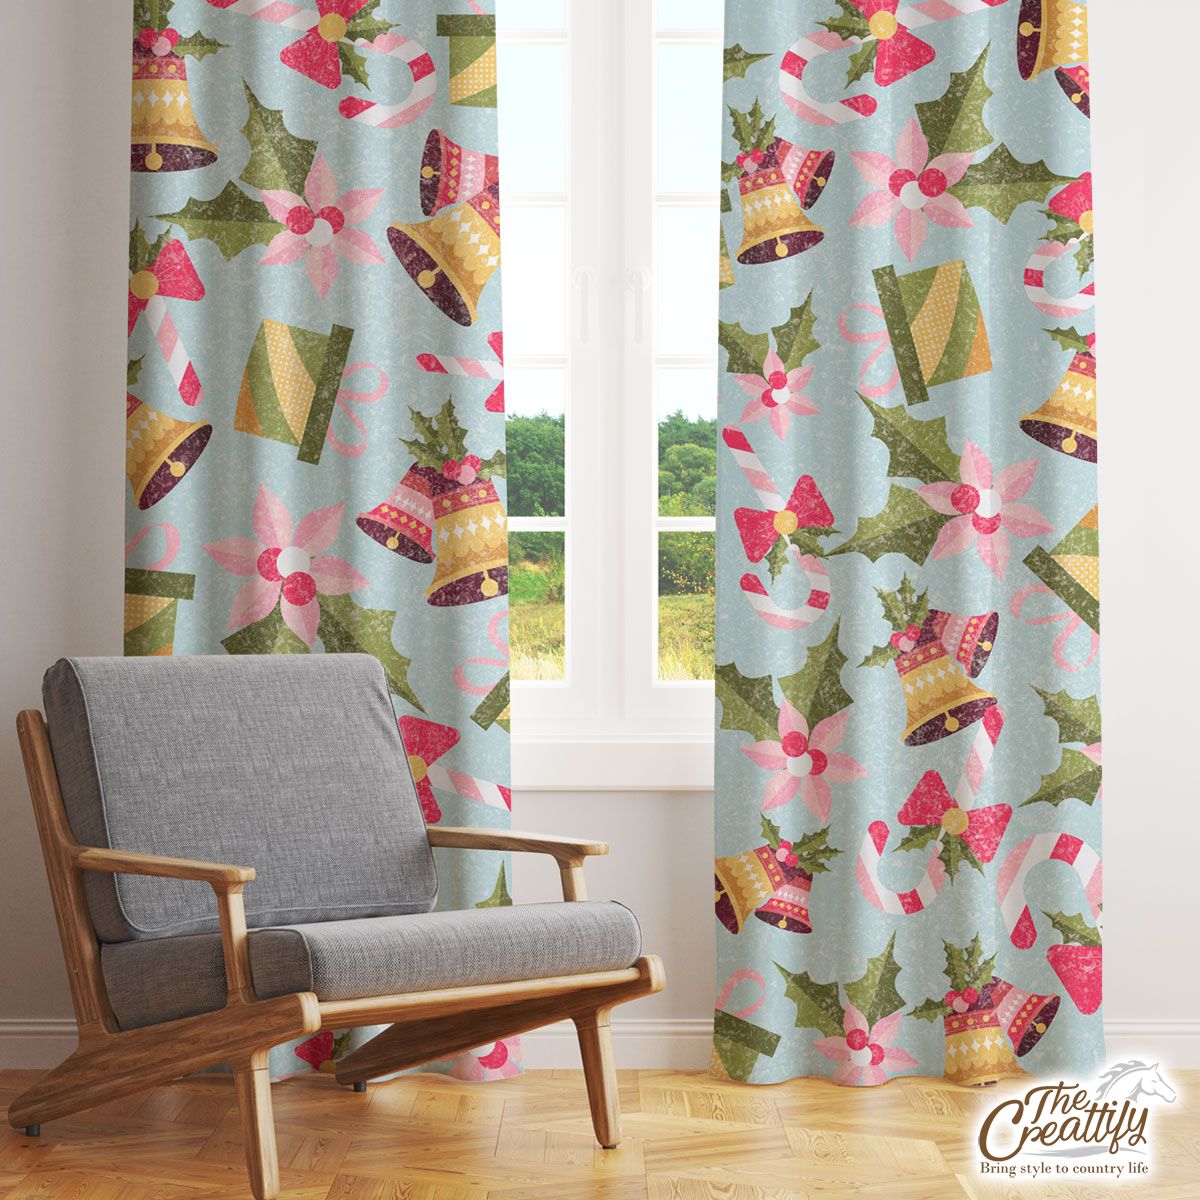 Bells, Christmas Bell And Candy Canes With Christmas Gifts Window Curtain